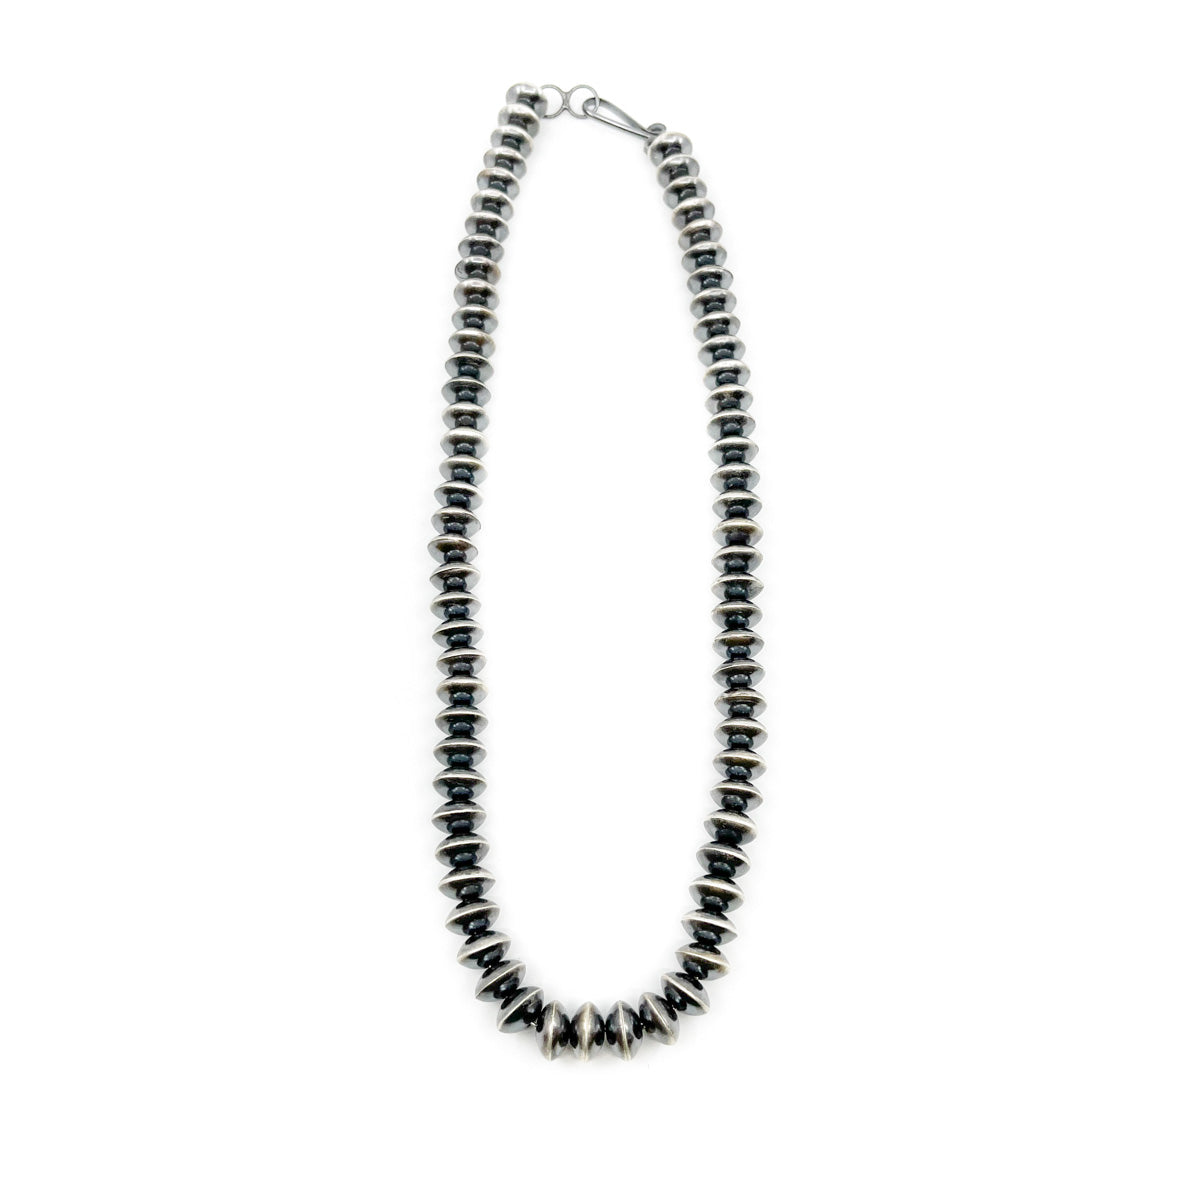 Load image into Gallery viewer, Strand of Handcrafted Silver Beads - Michelle Jameson - 20 inches
